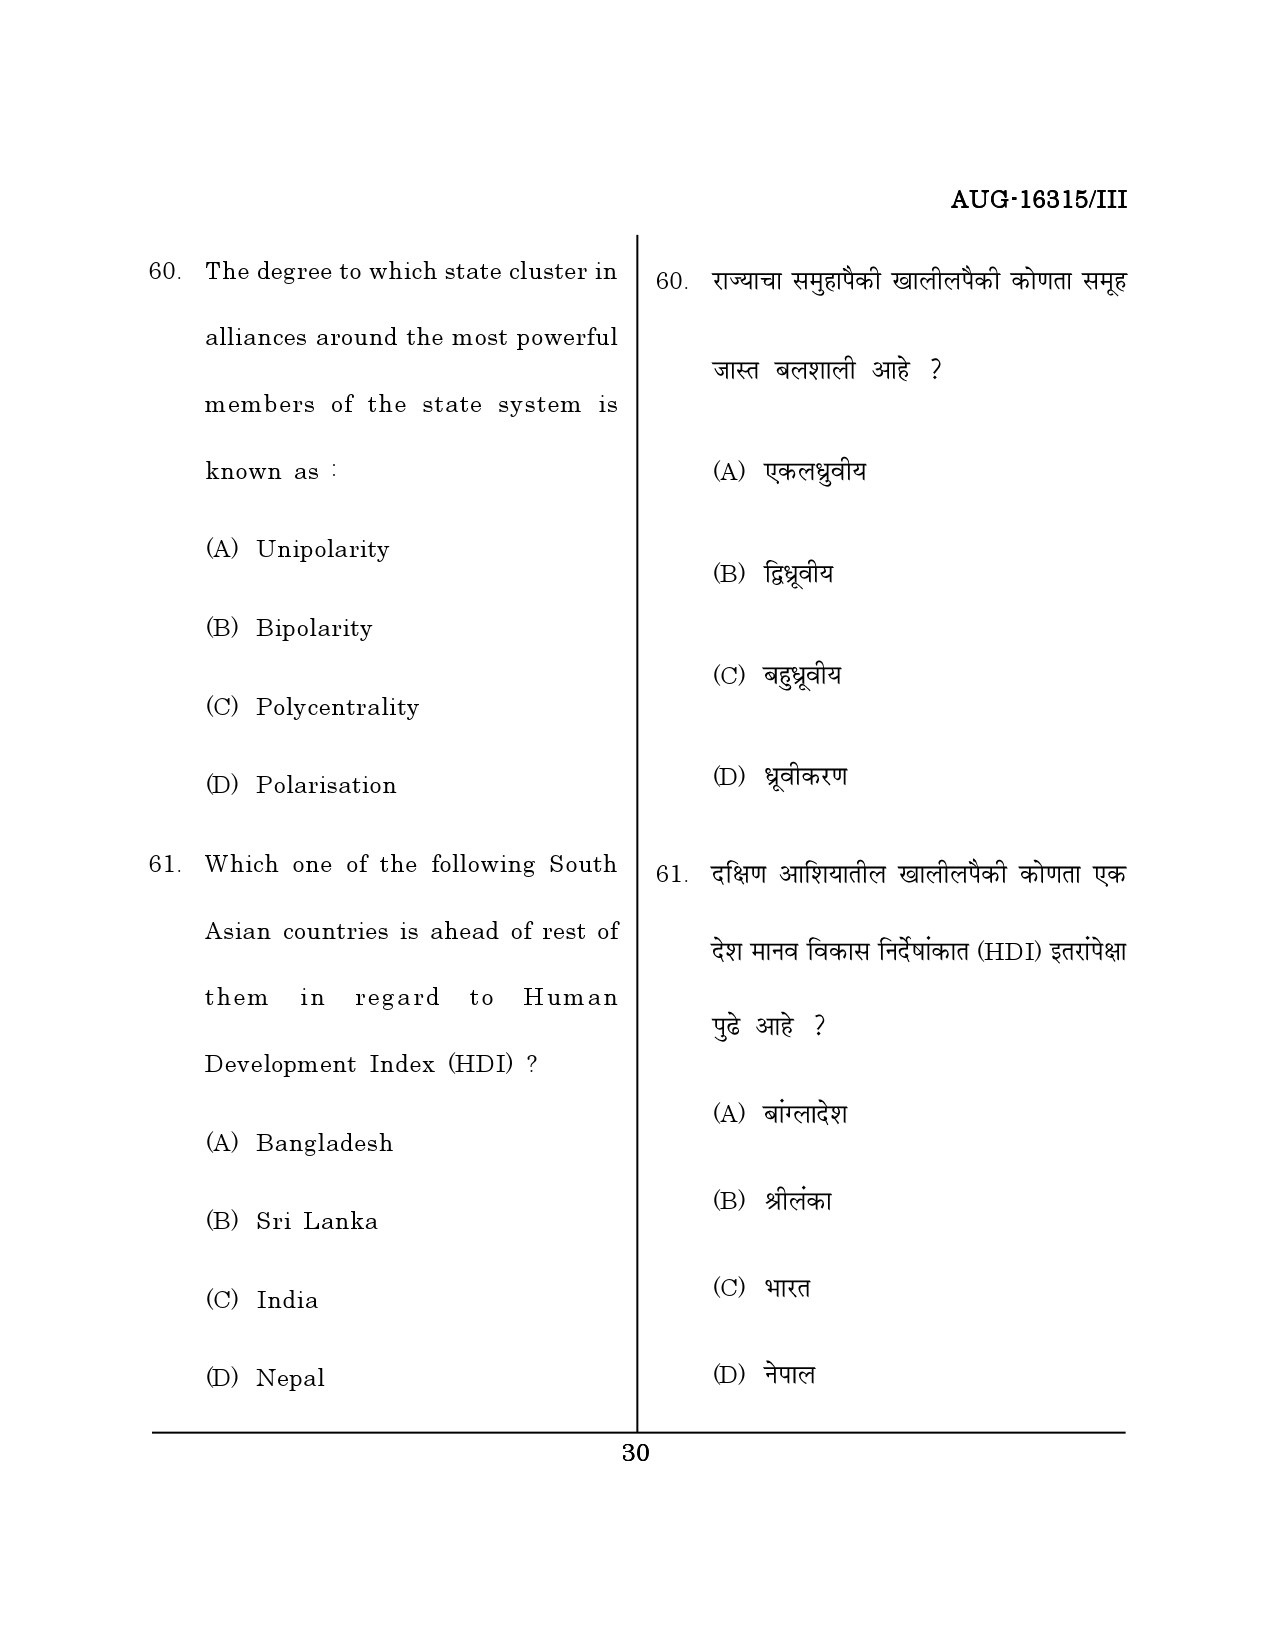 Maharashtra SET Defence and Strategic Studies Question Paper III August 2015 29